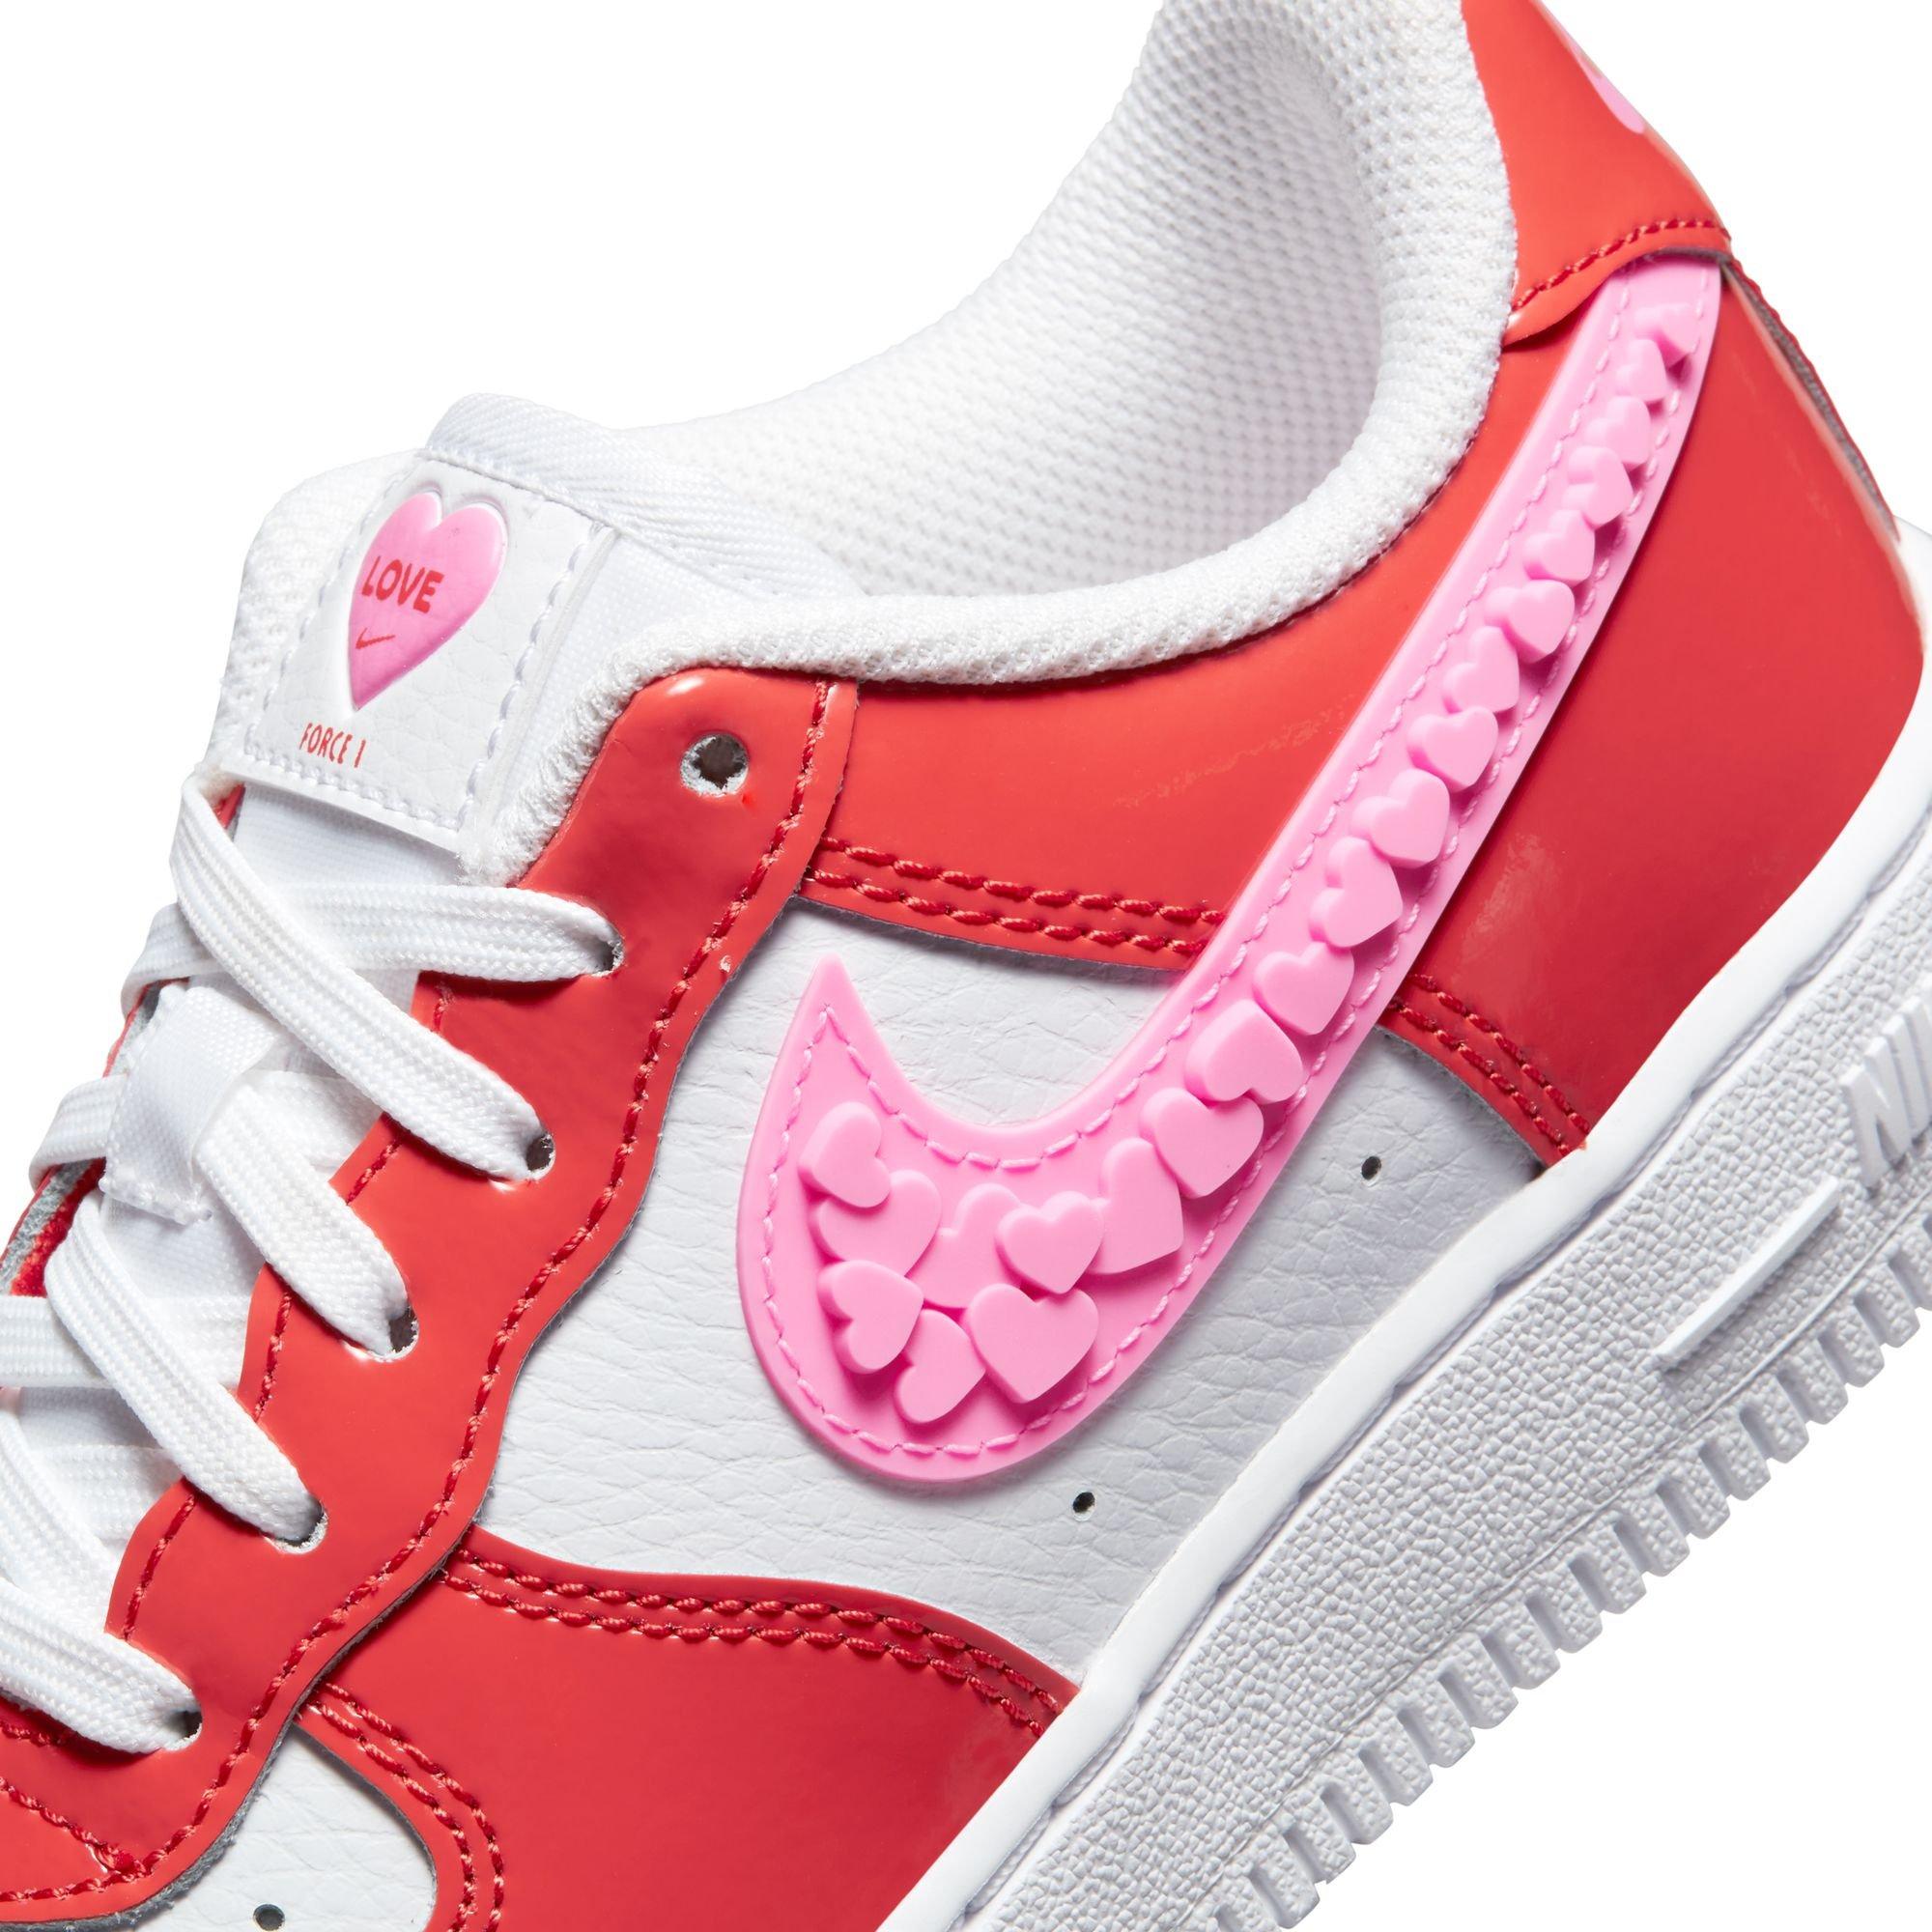 Nike Air Force 1 LV8 "Chinese New Year" BRAND NEW Toddler 5C